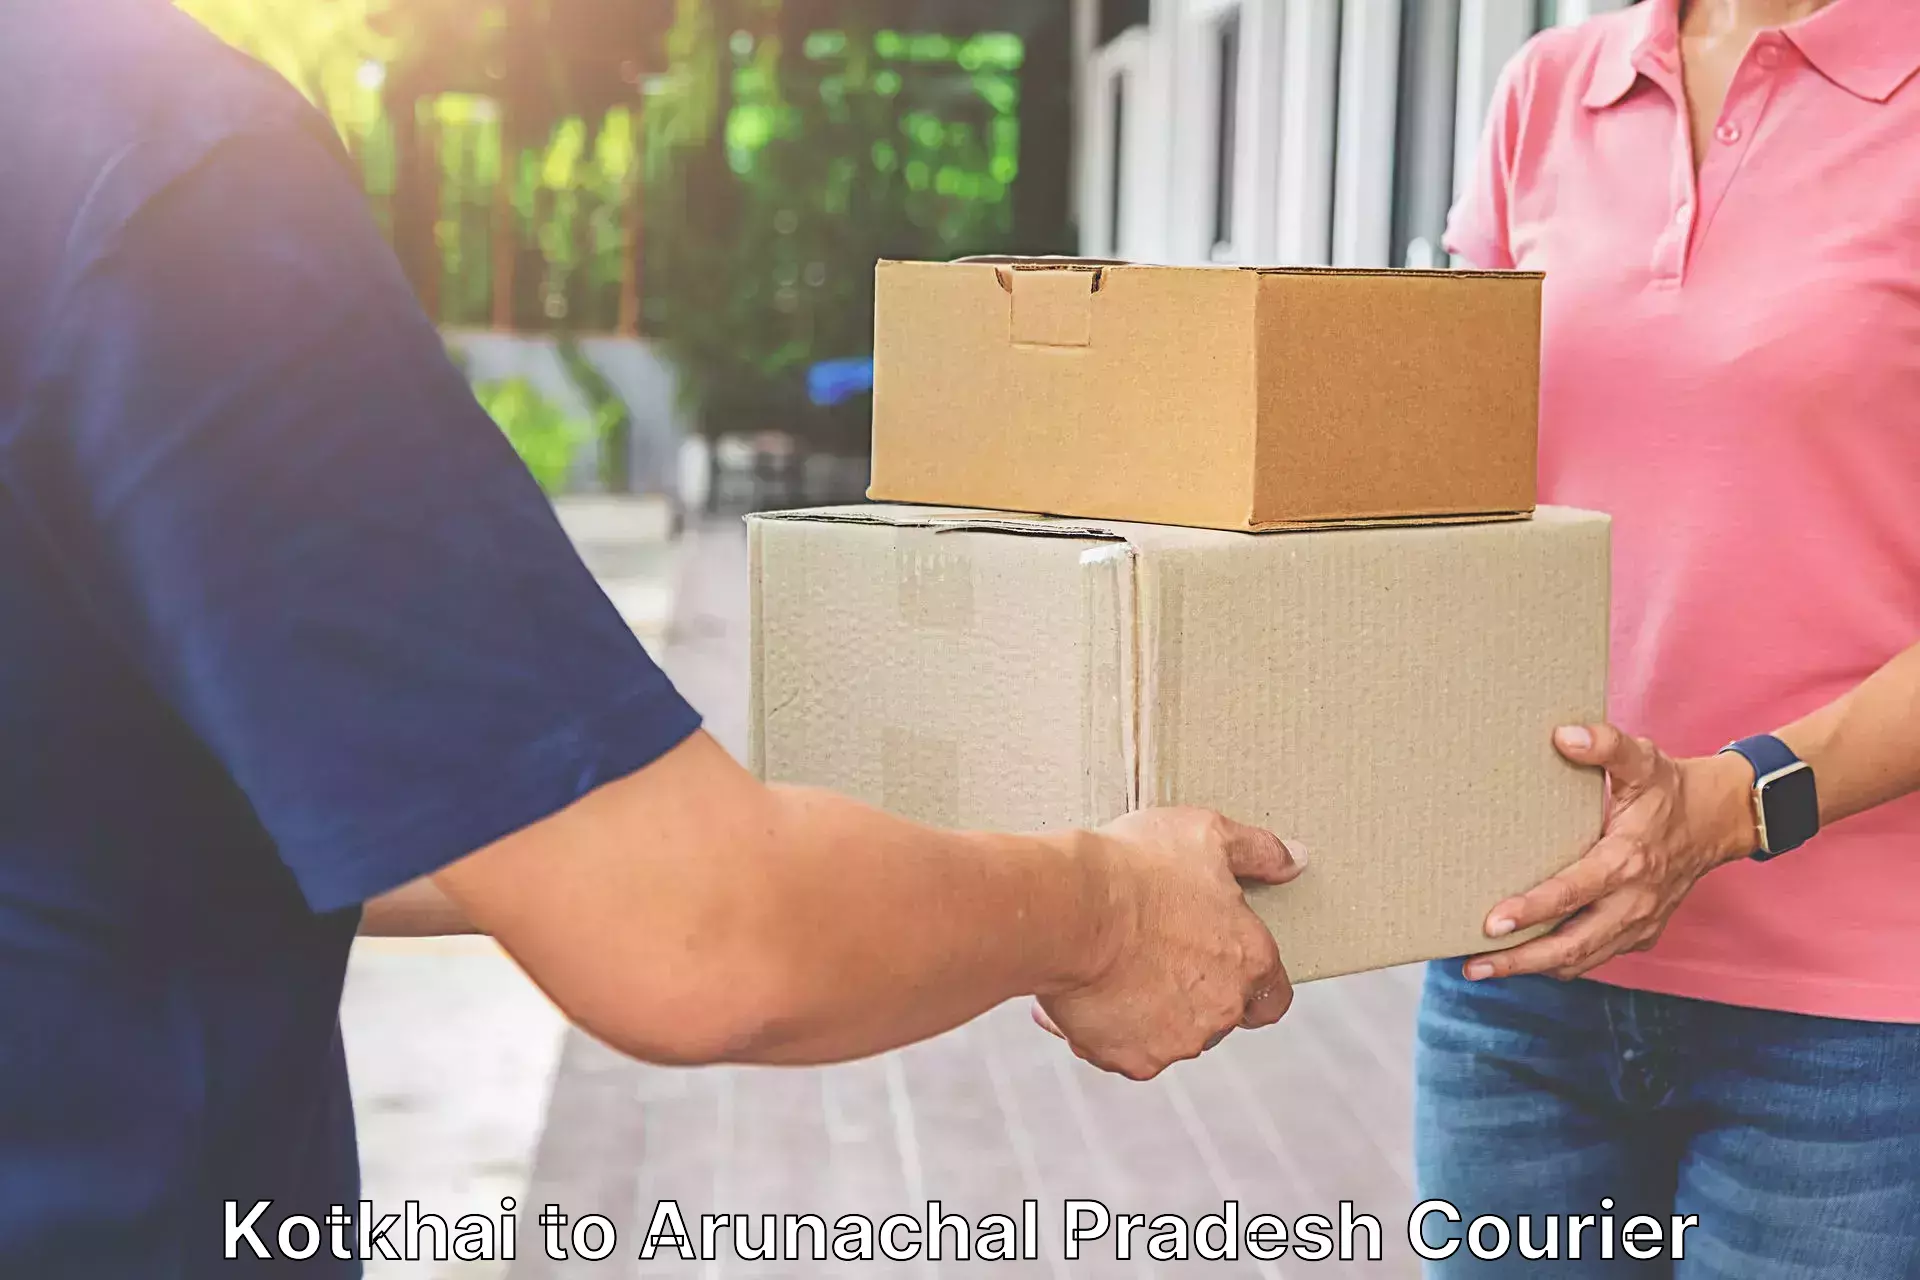 Professional courier handling Kotkhai to Roing